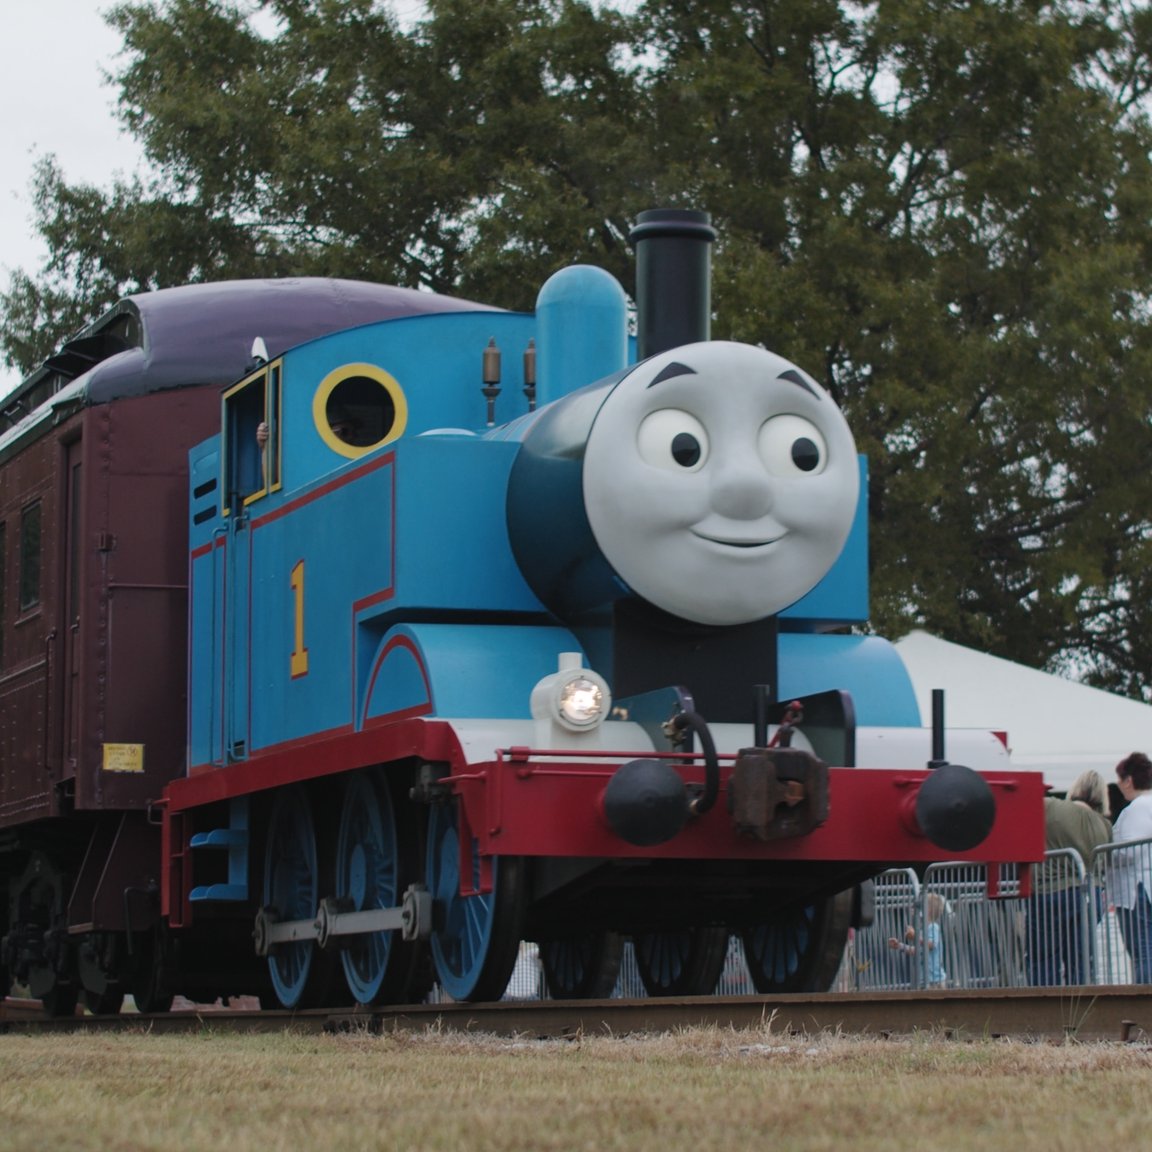 Happy #NationalTrainDay from a documentary about a little blue train. #AnUnlikelyFandom